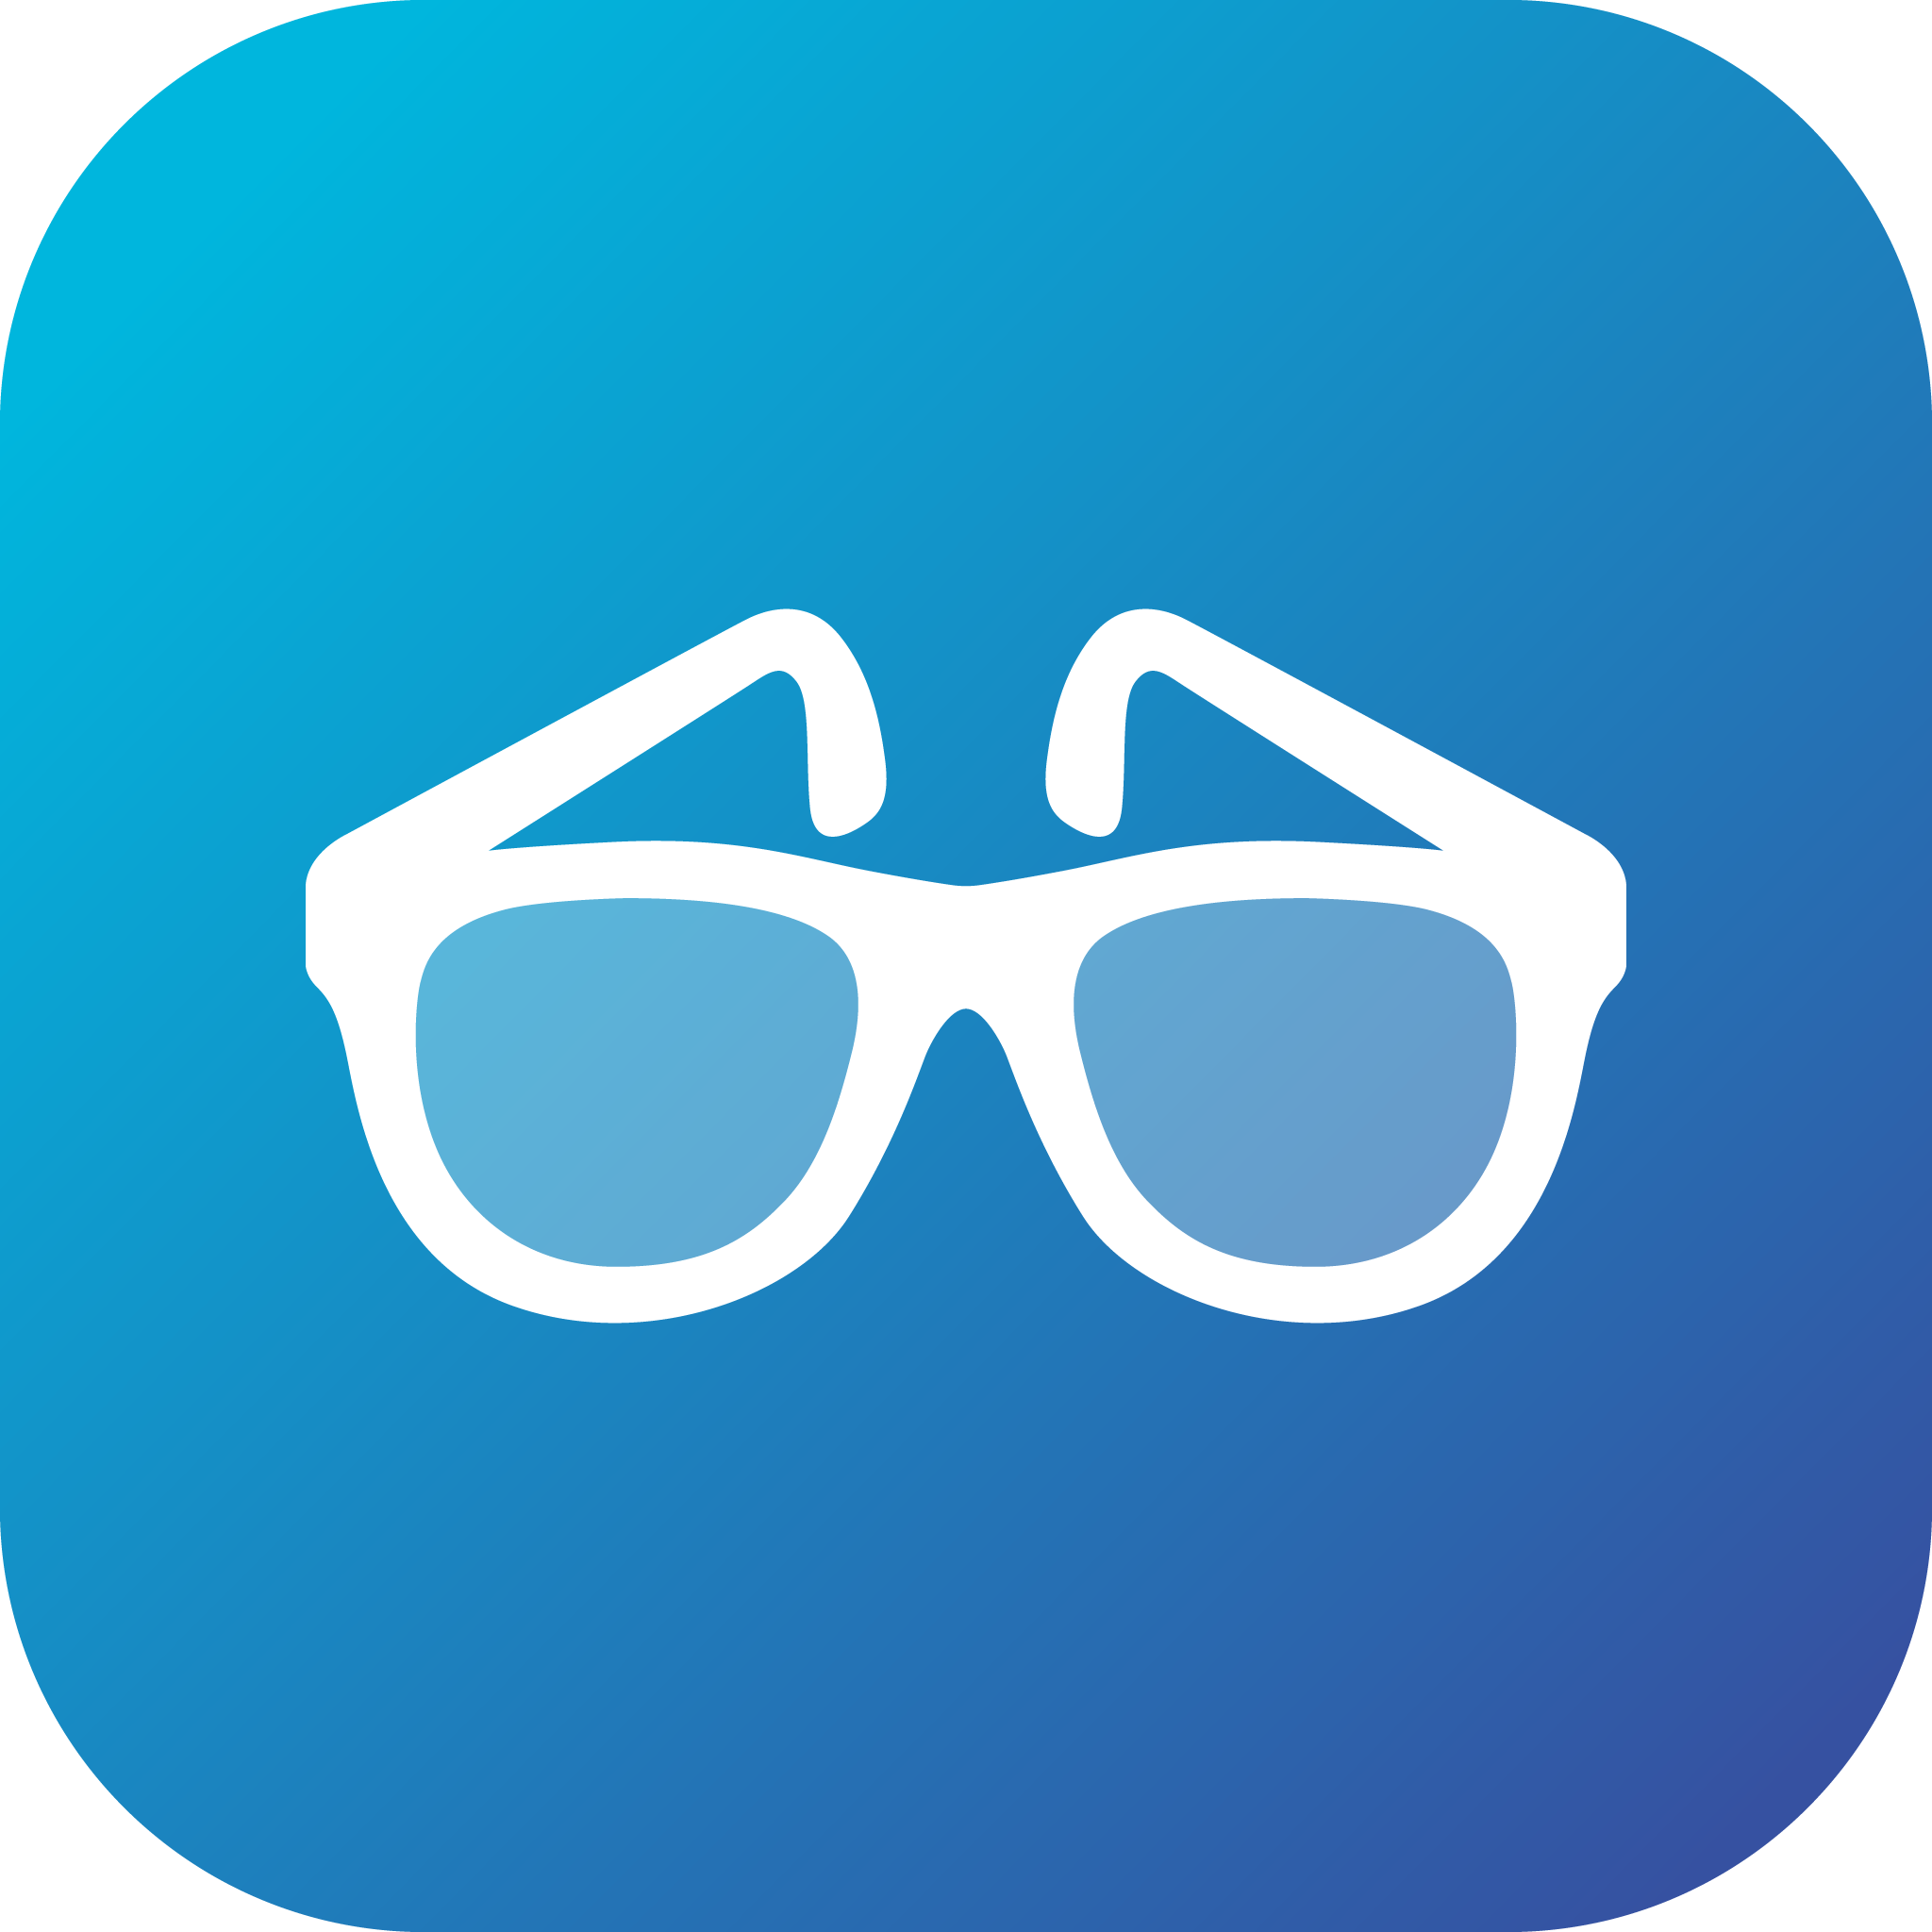 ObjectViewer-app-icon-rounded.png